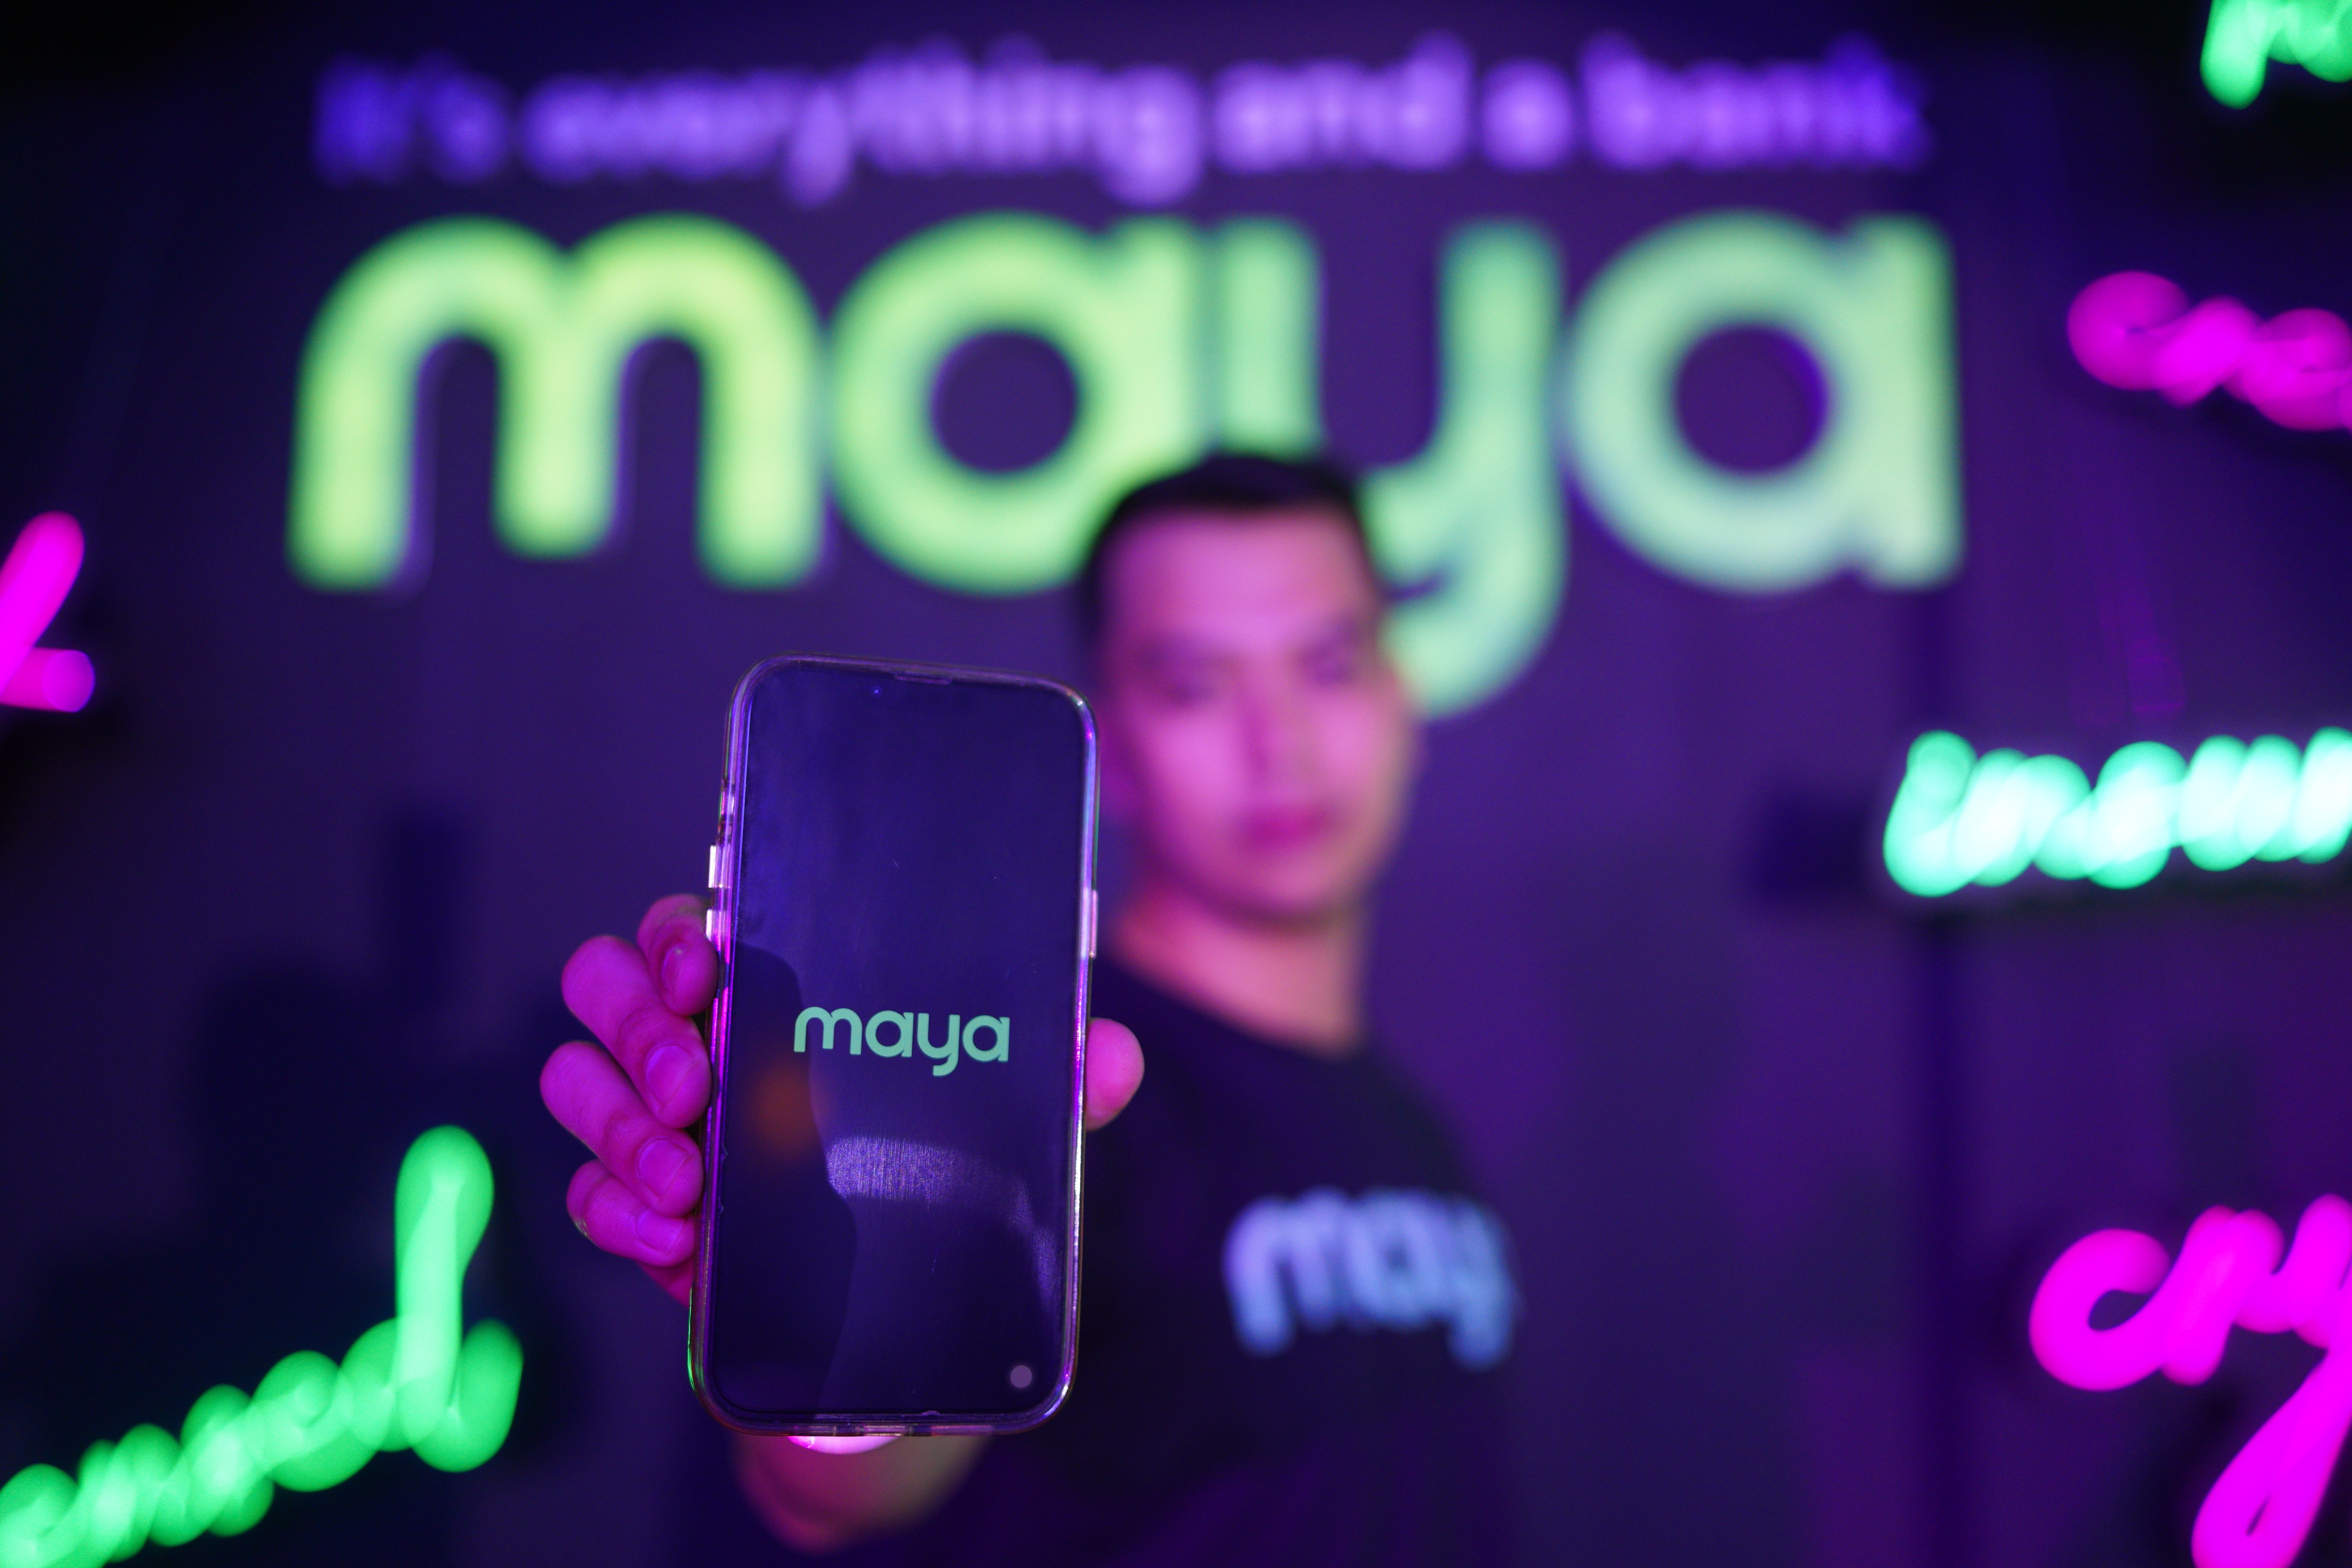 Maya is the fastest-growing digital bank in the Philippines